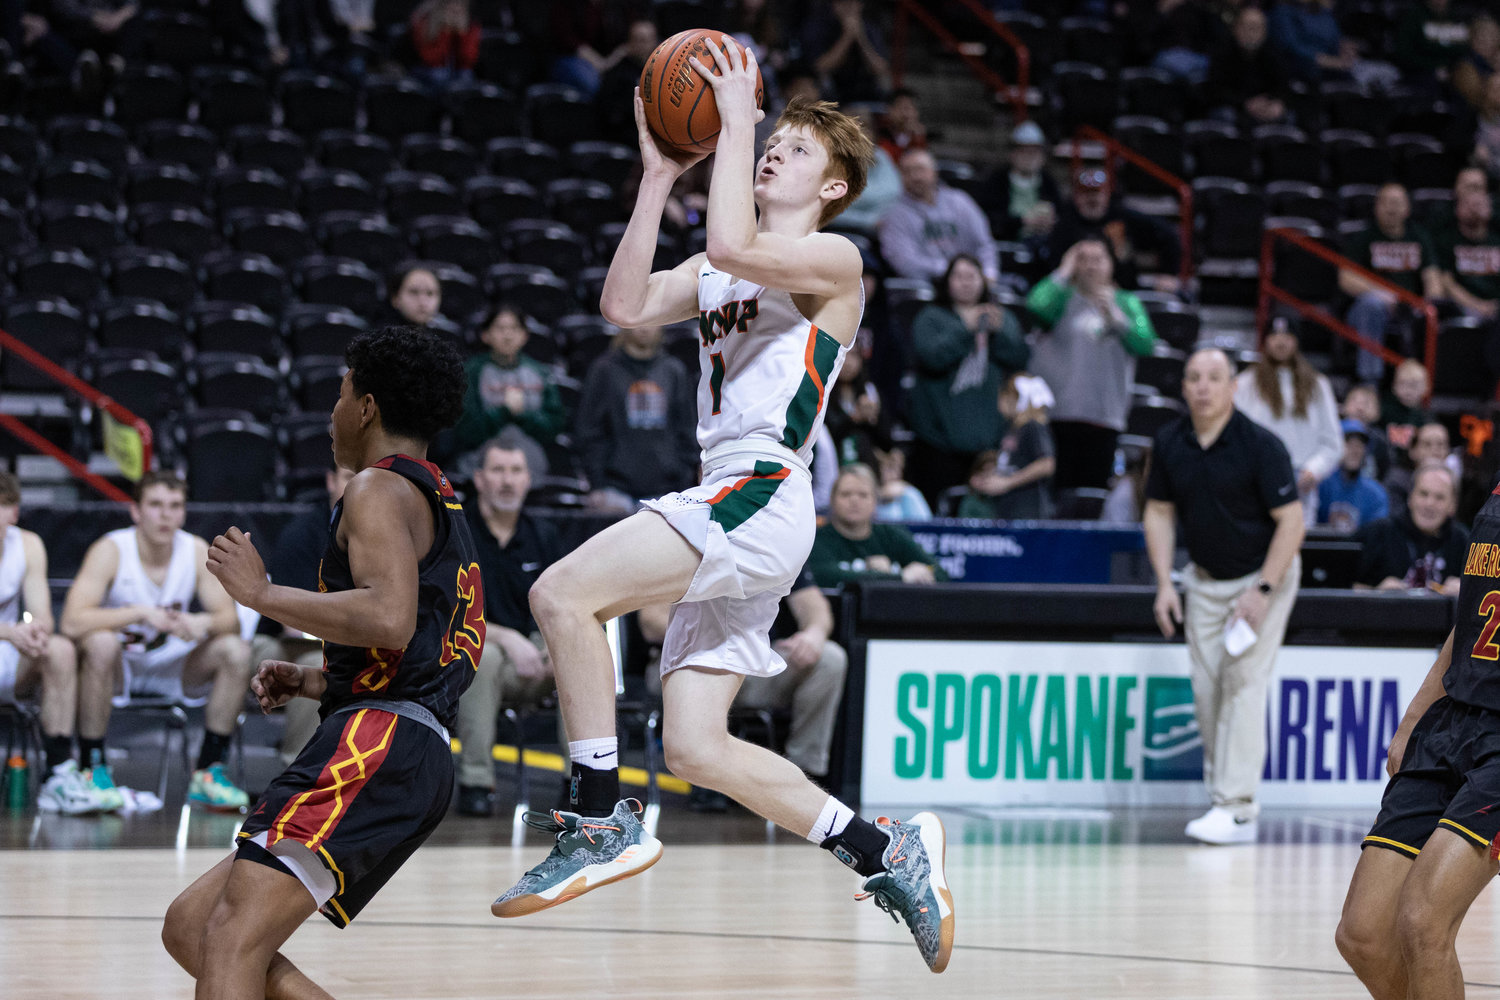 Morton-White Pass guard Jake Cournyer rises for a layup against Lake Roosevelt in the 2B state fourth-place game at Spokane Arena March 3.